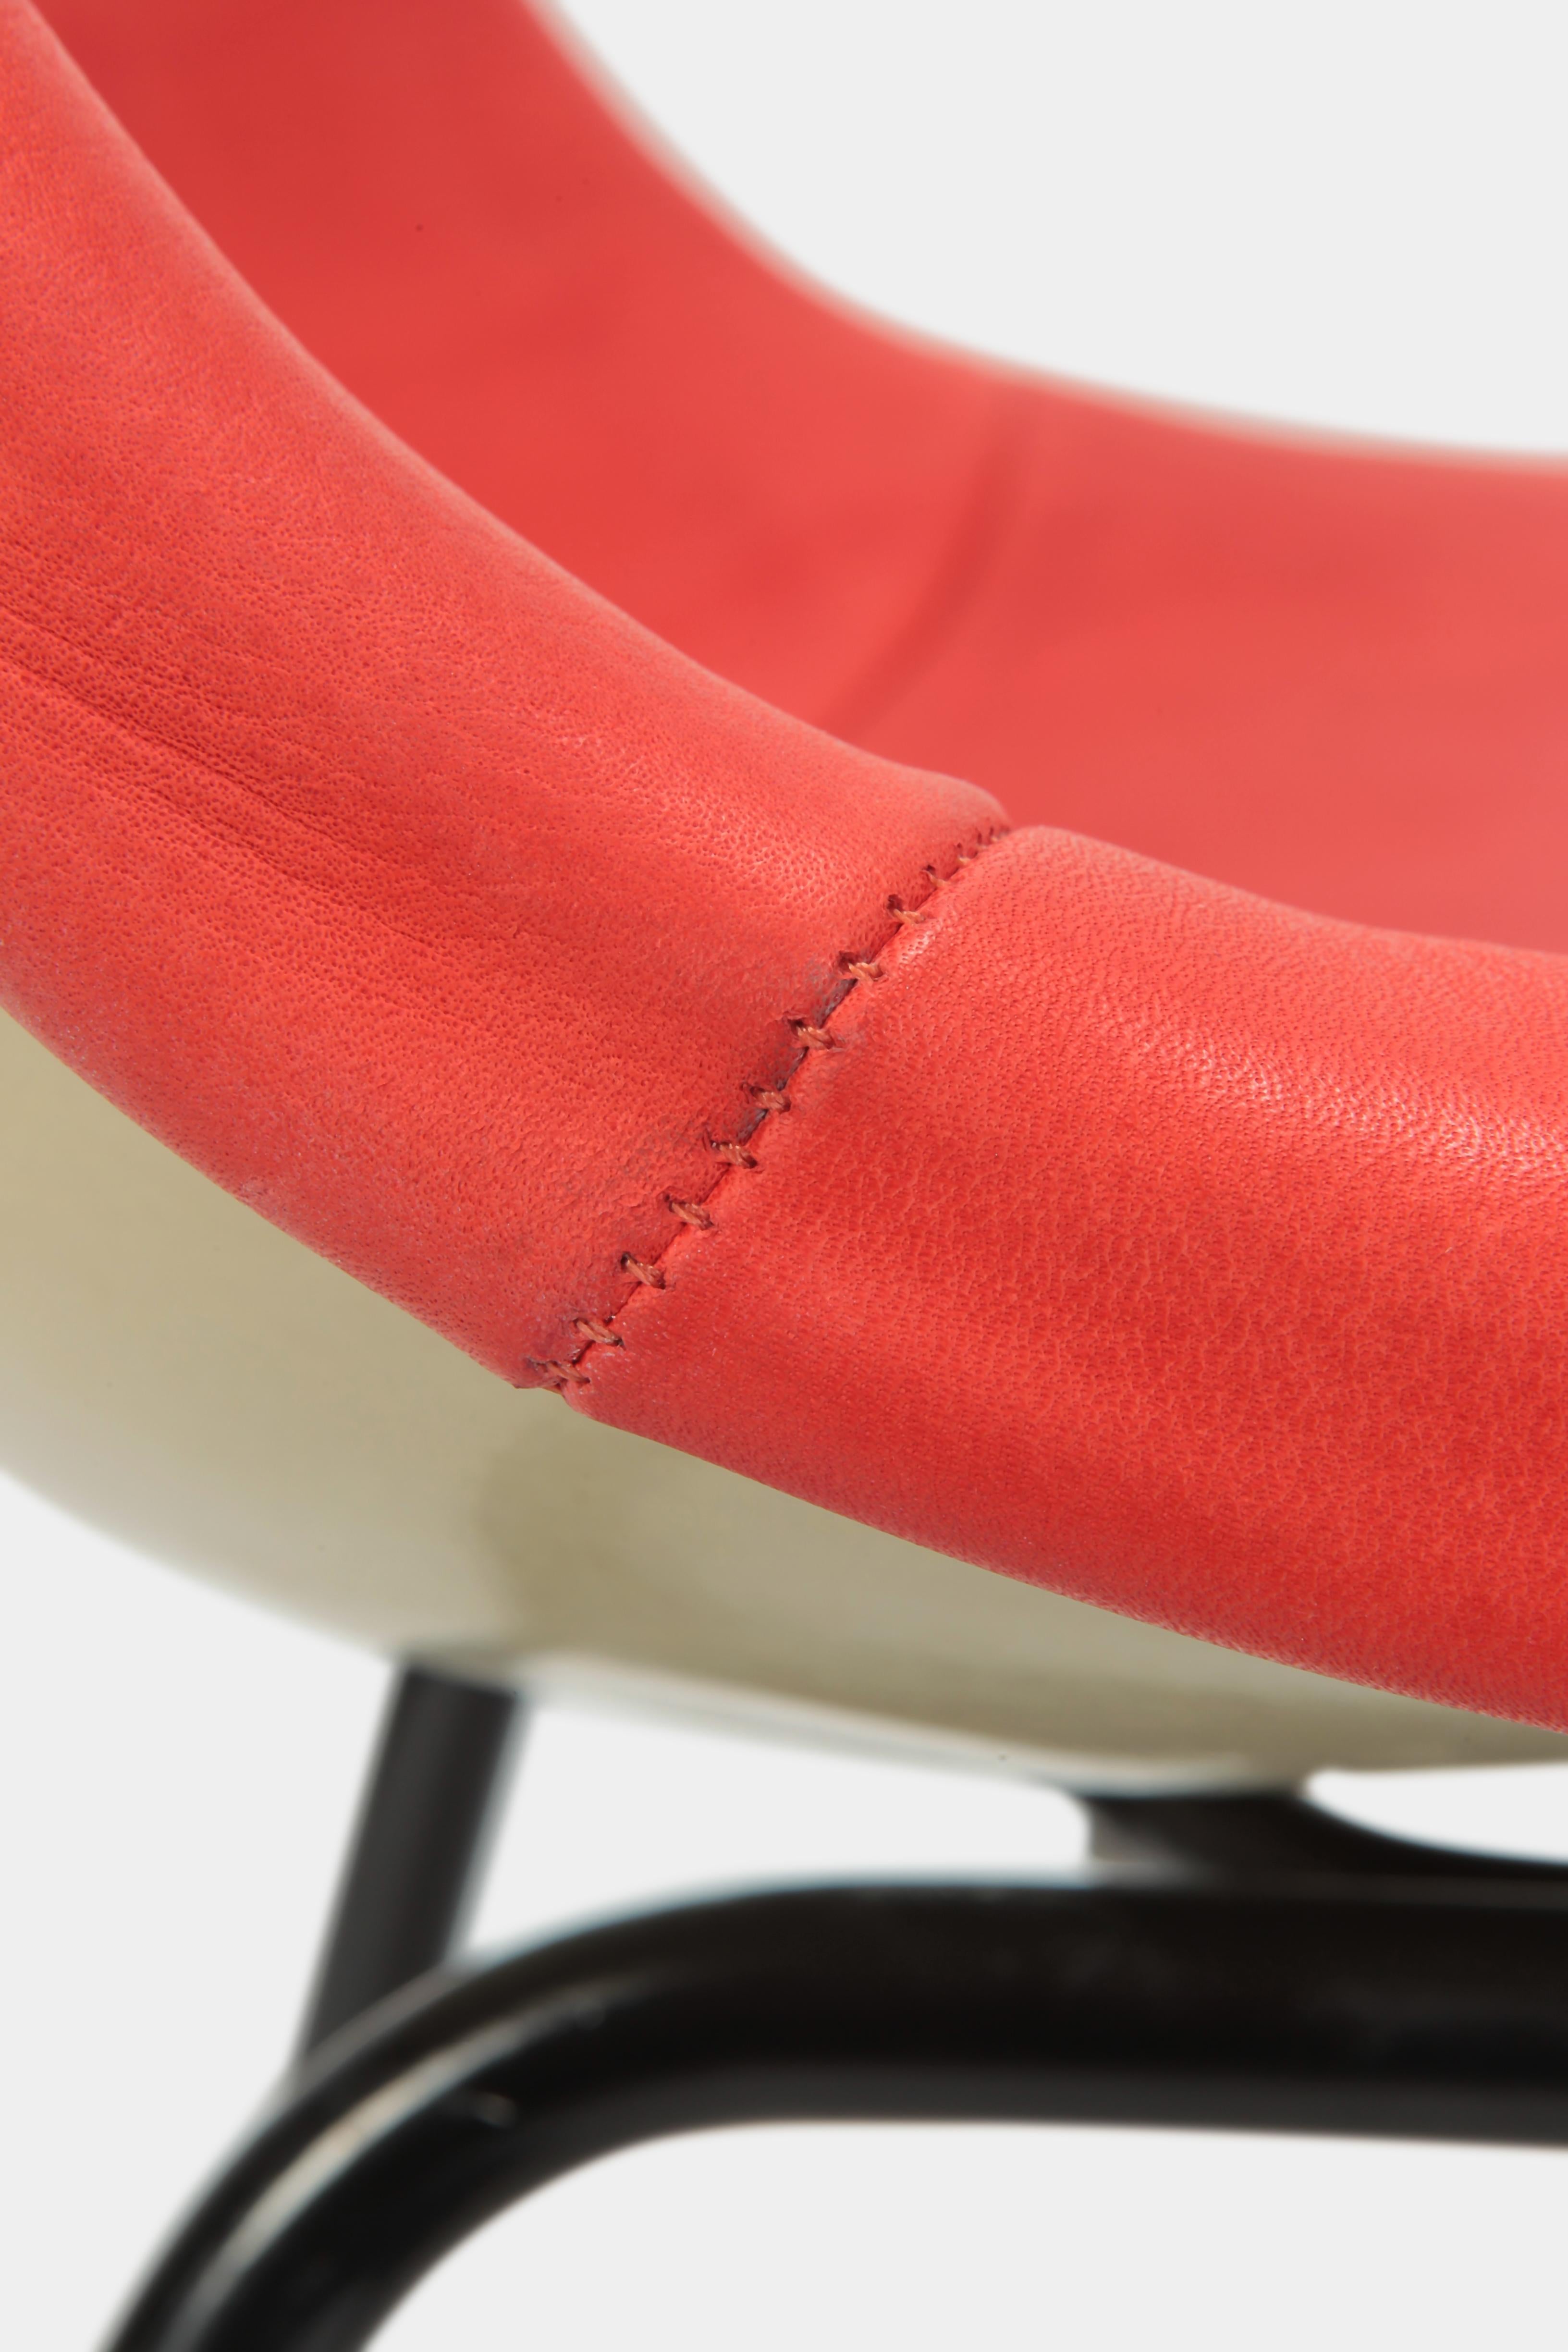 Eames Side Chair Red Leather, 1960s For Sale 4